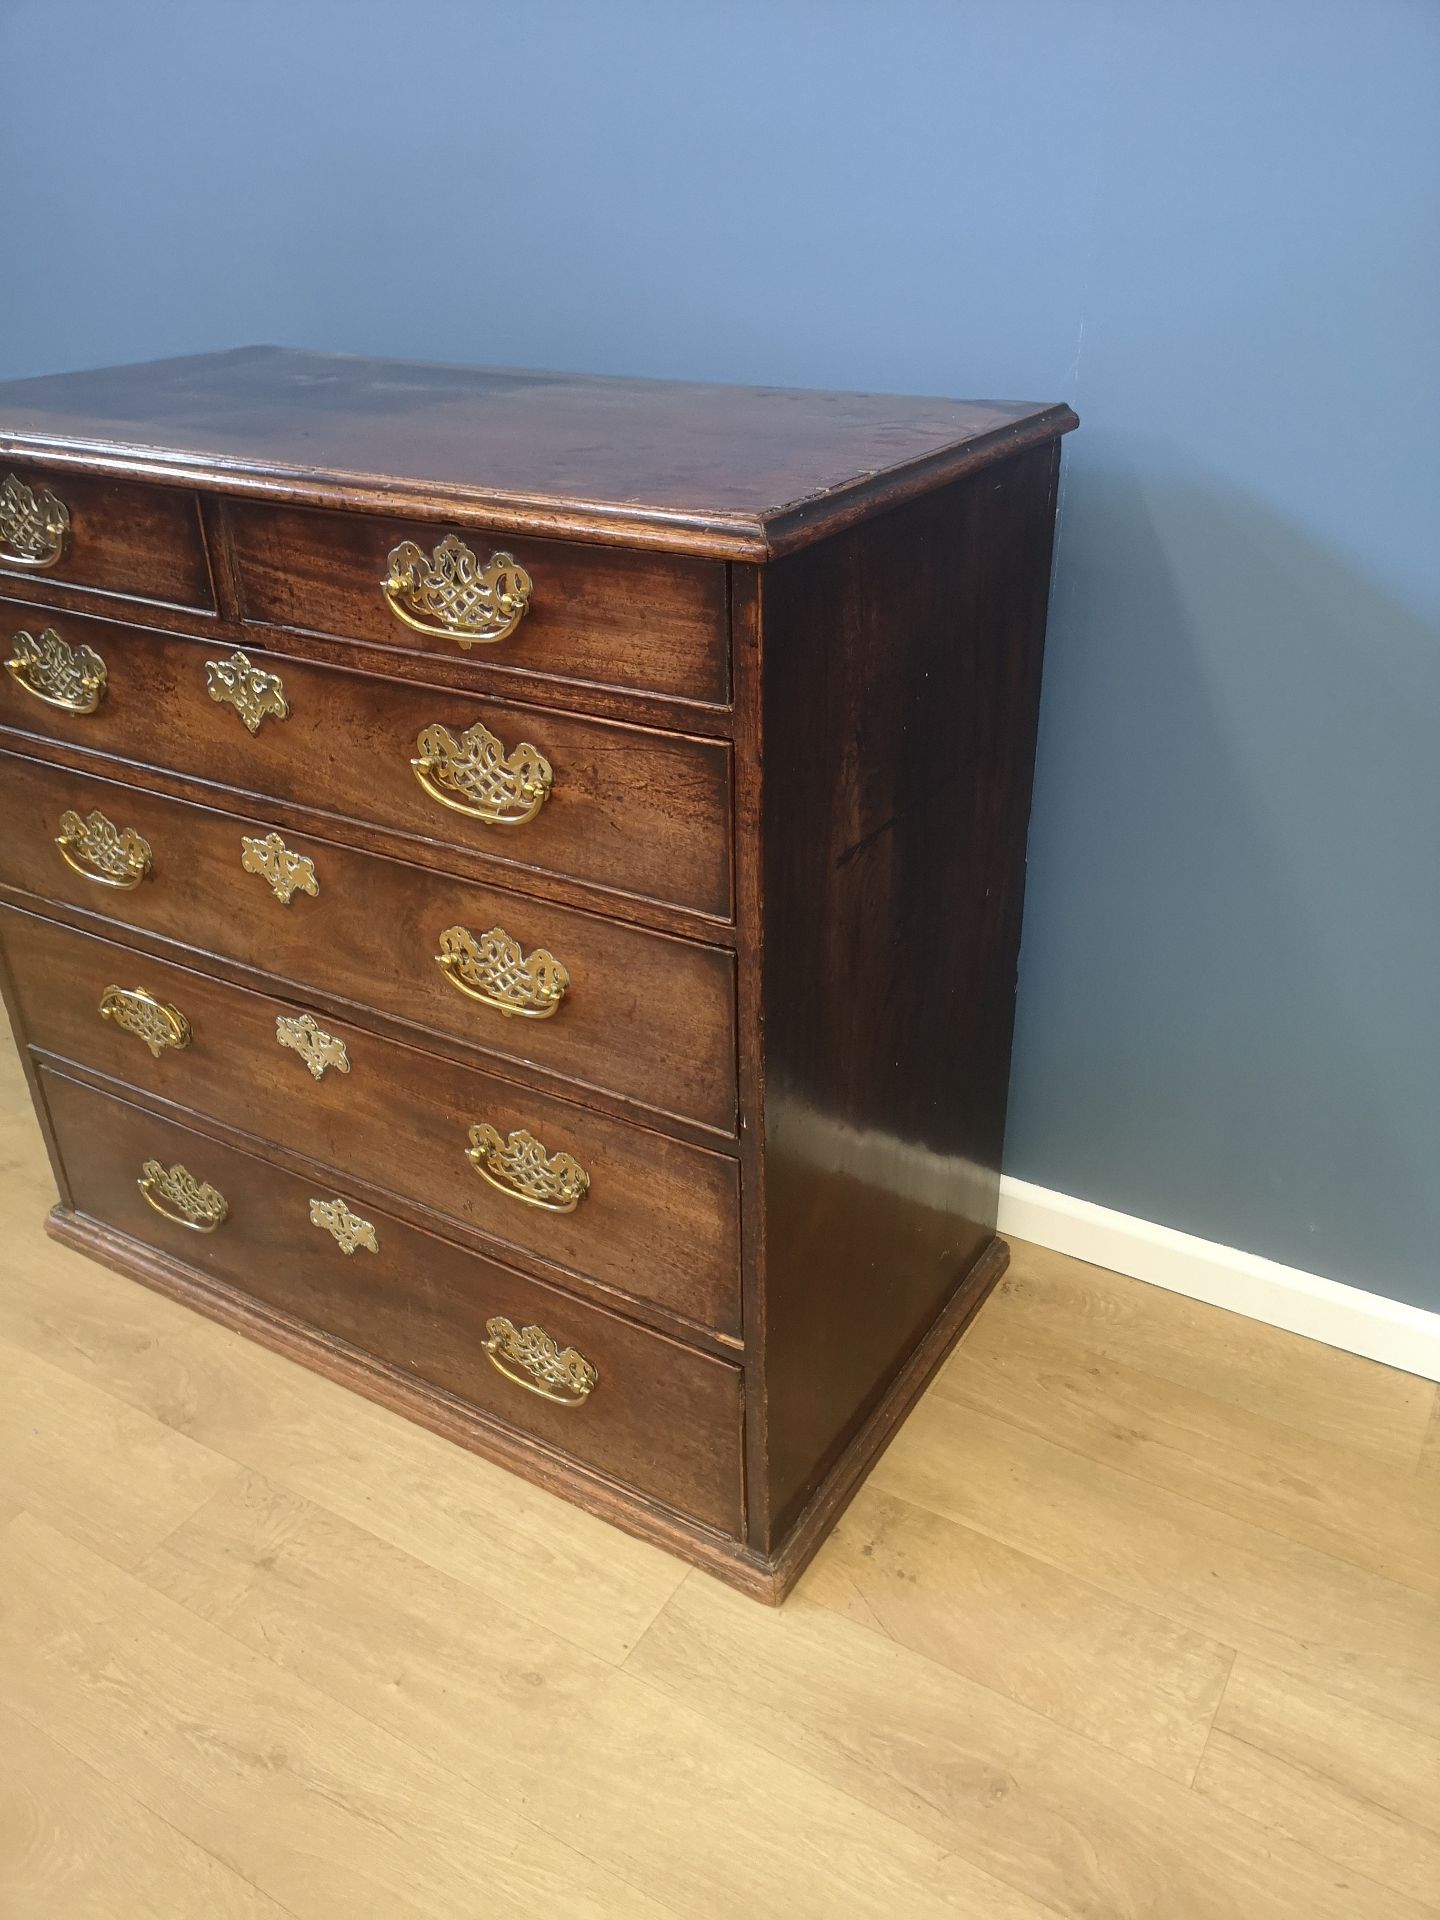 Mahogany chest of drawers - Image 3 of 4